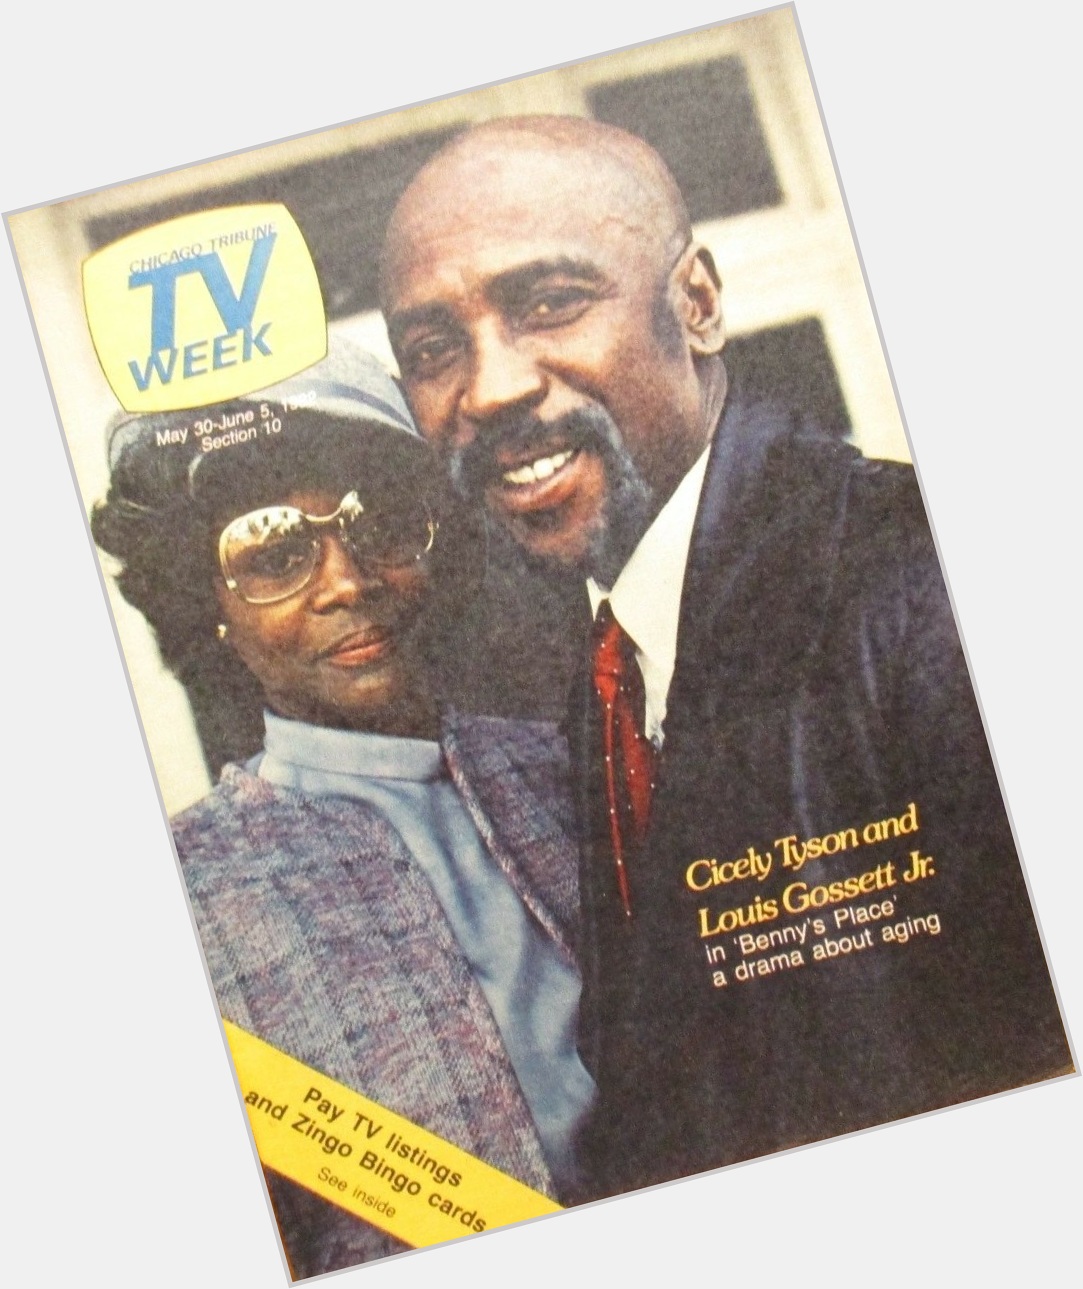 Happy Birthday to Louis Gossett Jr, born on this day in 1936
Chicago Tribune TV Week.  May 30 - June 5, 1982 